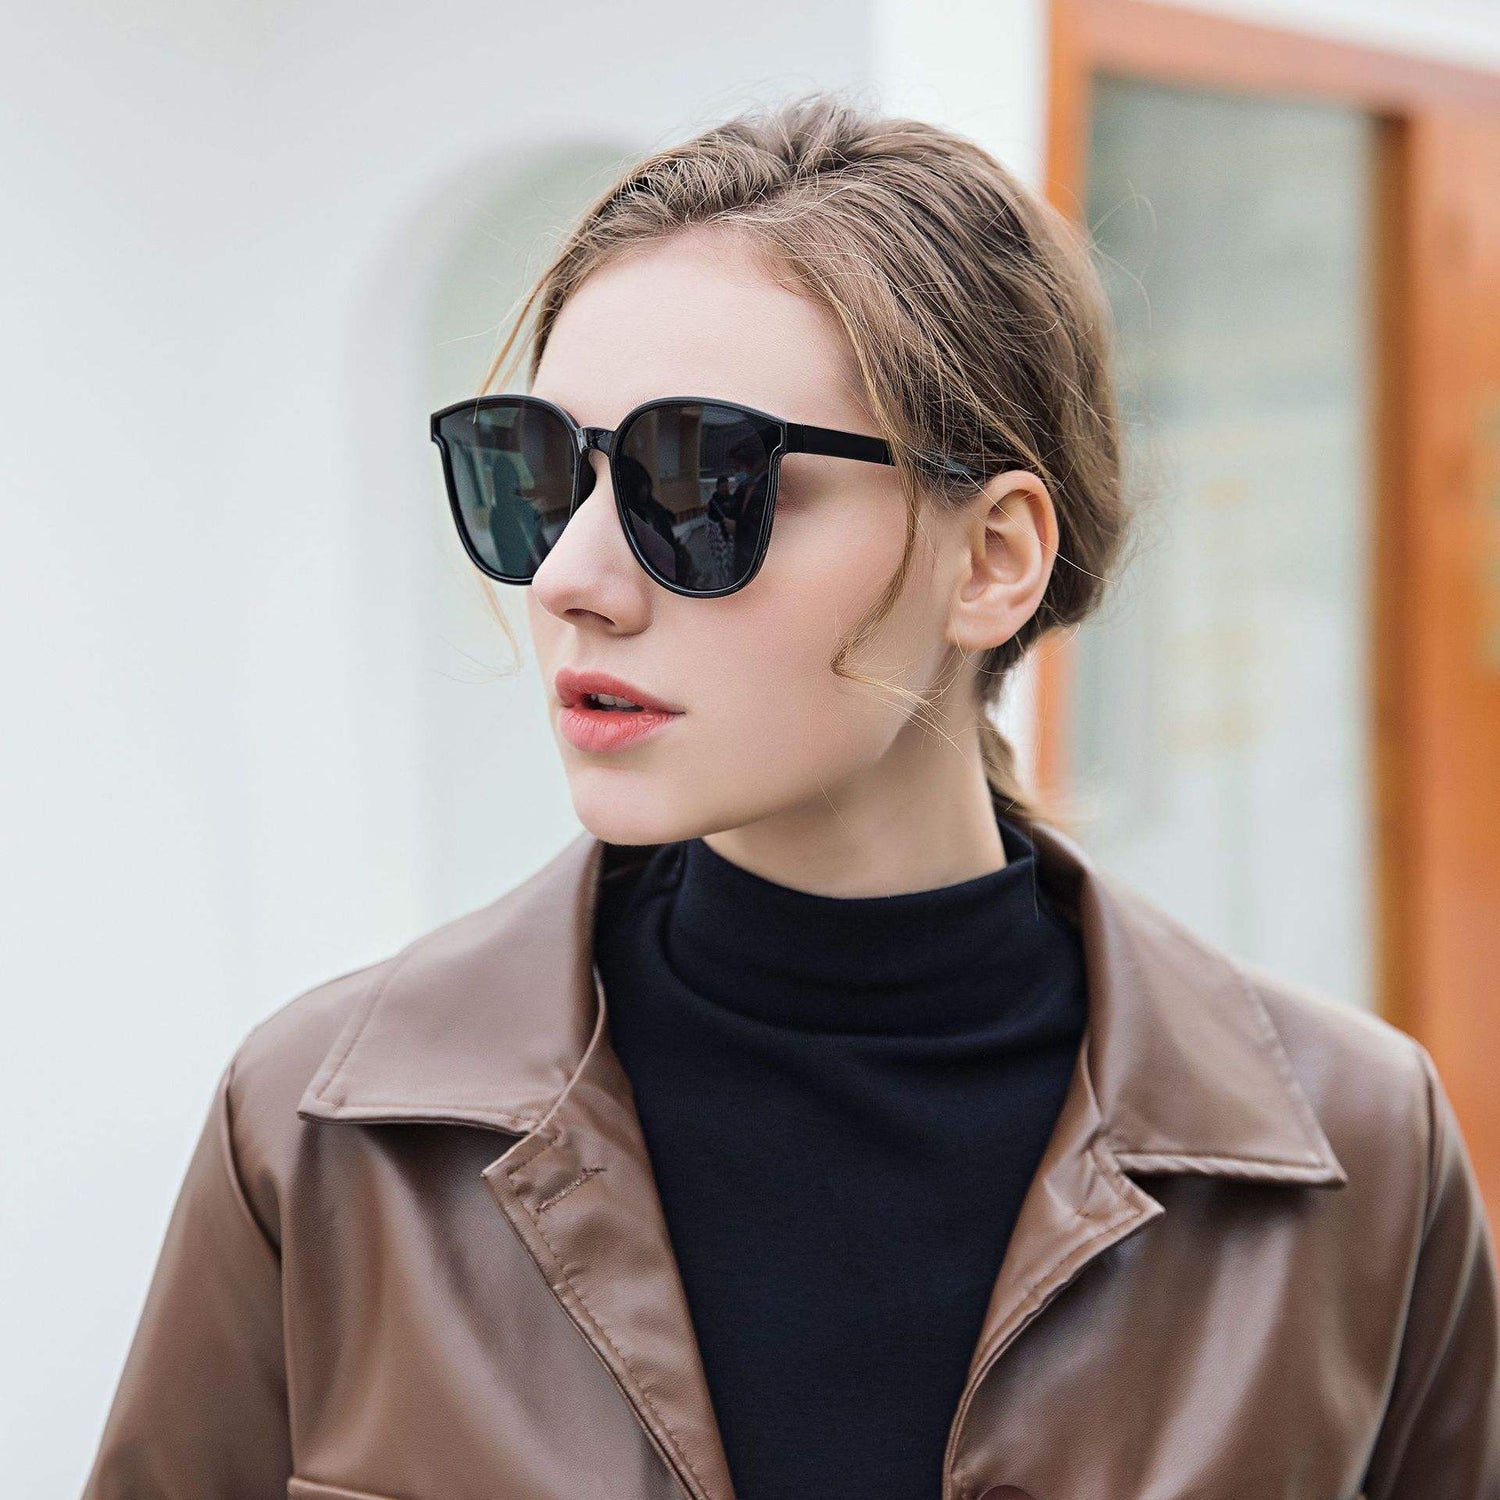 23 Sunglasses Brands for Every Summer Aesthetic | Sunglasses women  designer, Ray ban sunglasses outlet, Fashion